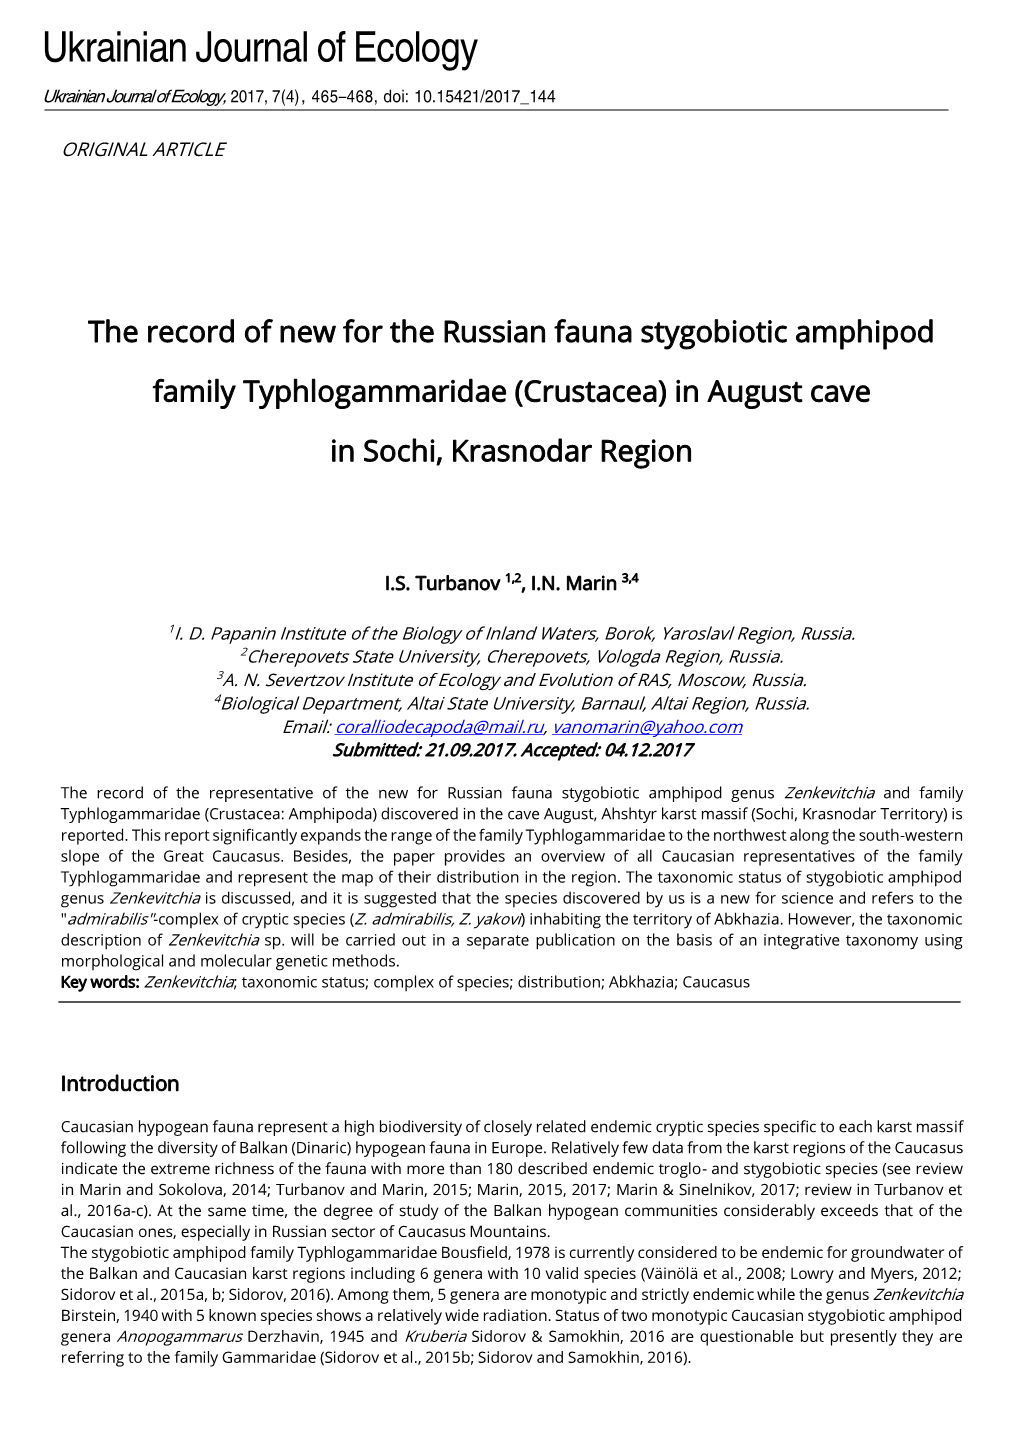 The Record of New for the Russian Fauna Stygobiotic Amphipod